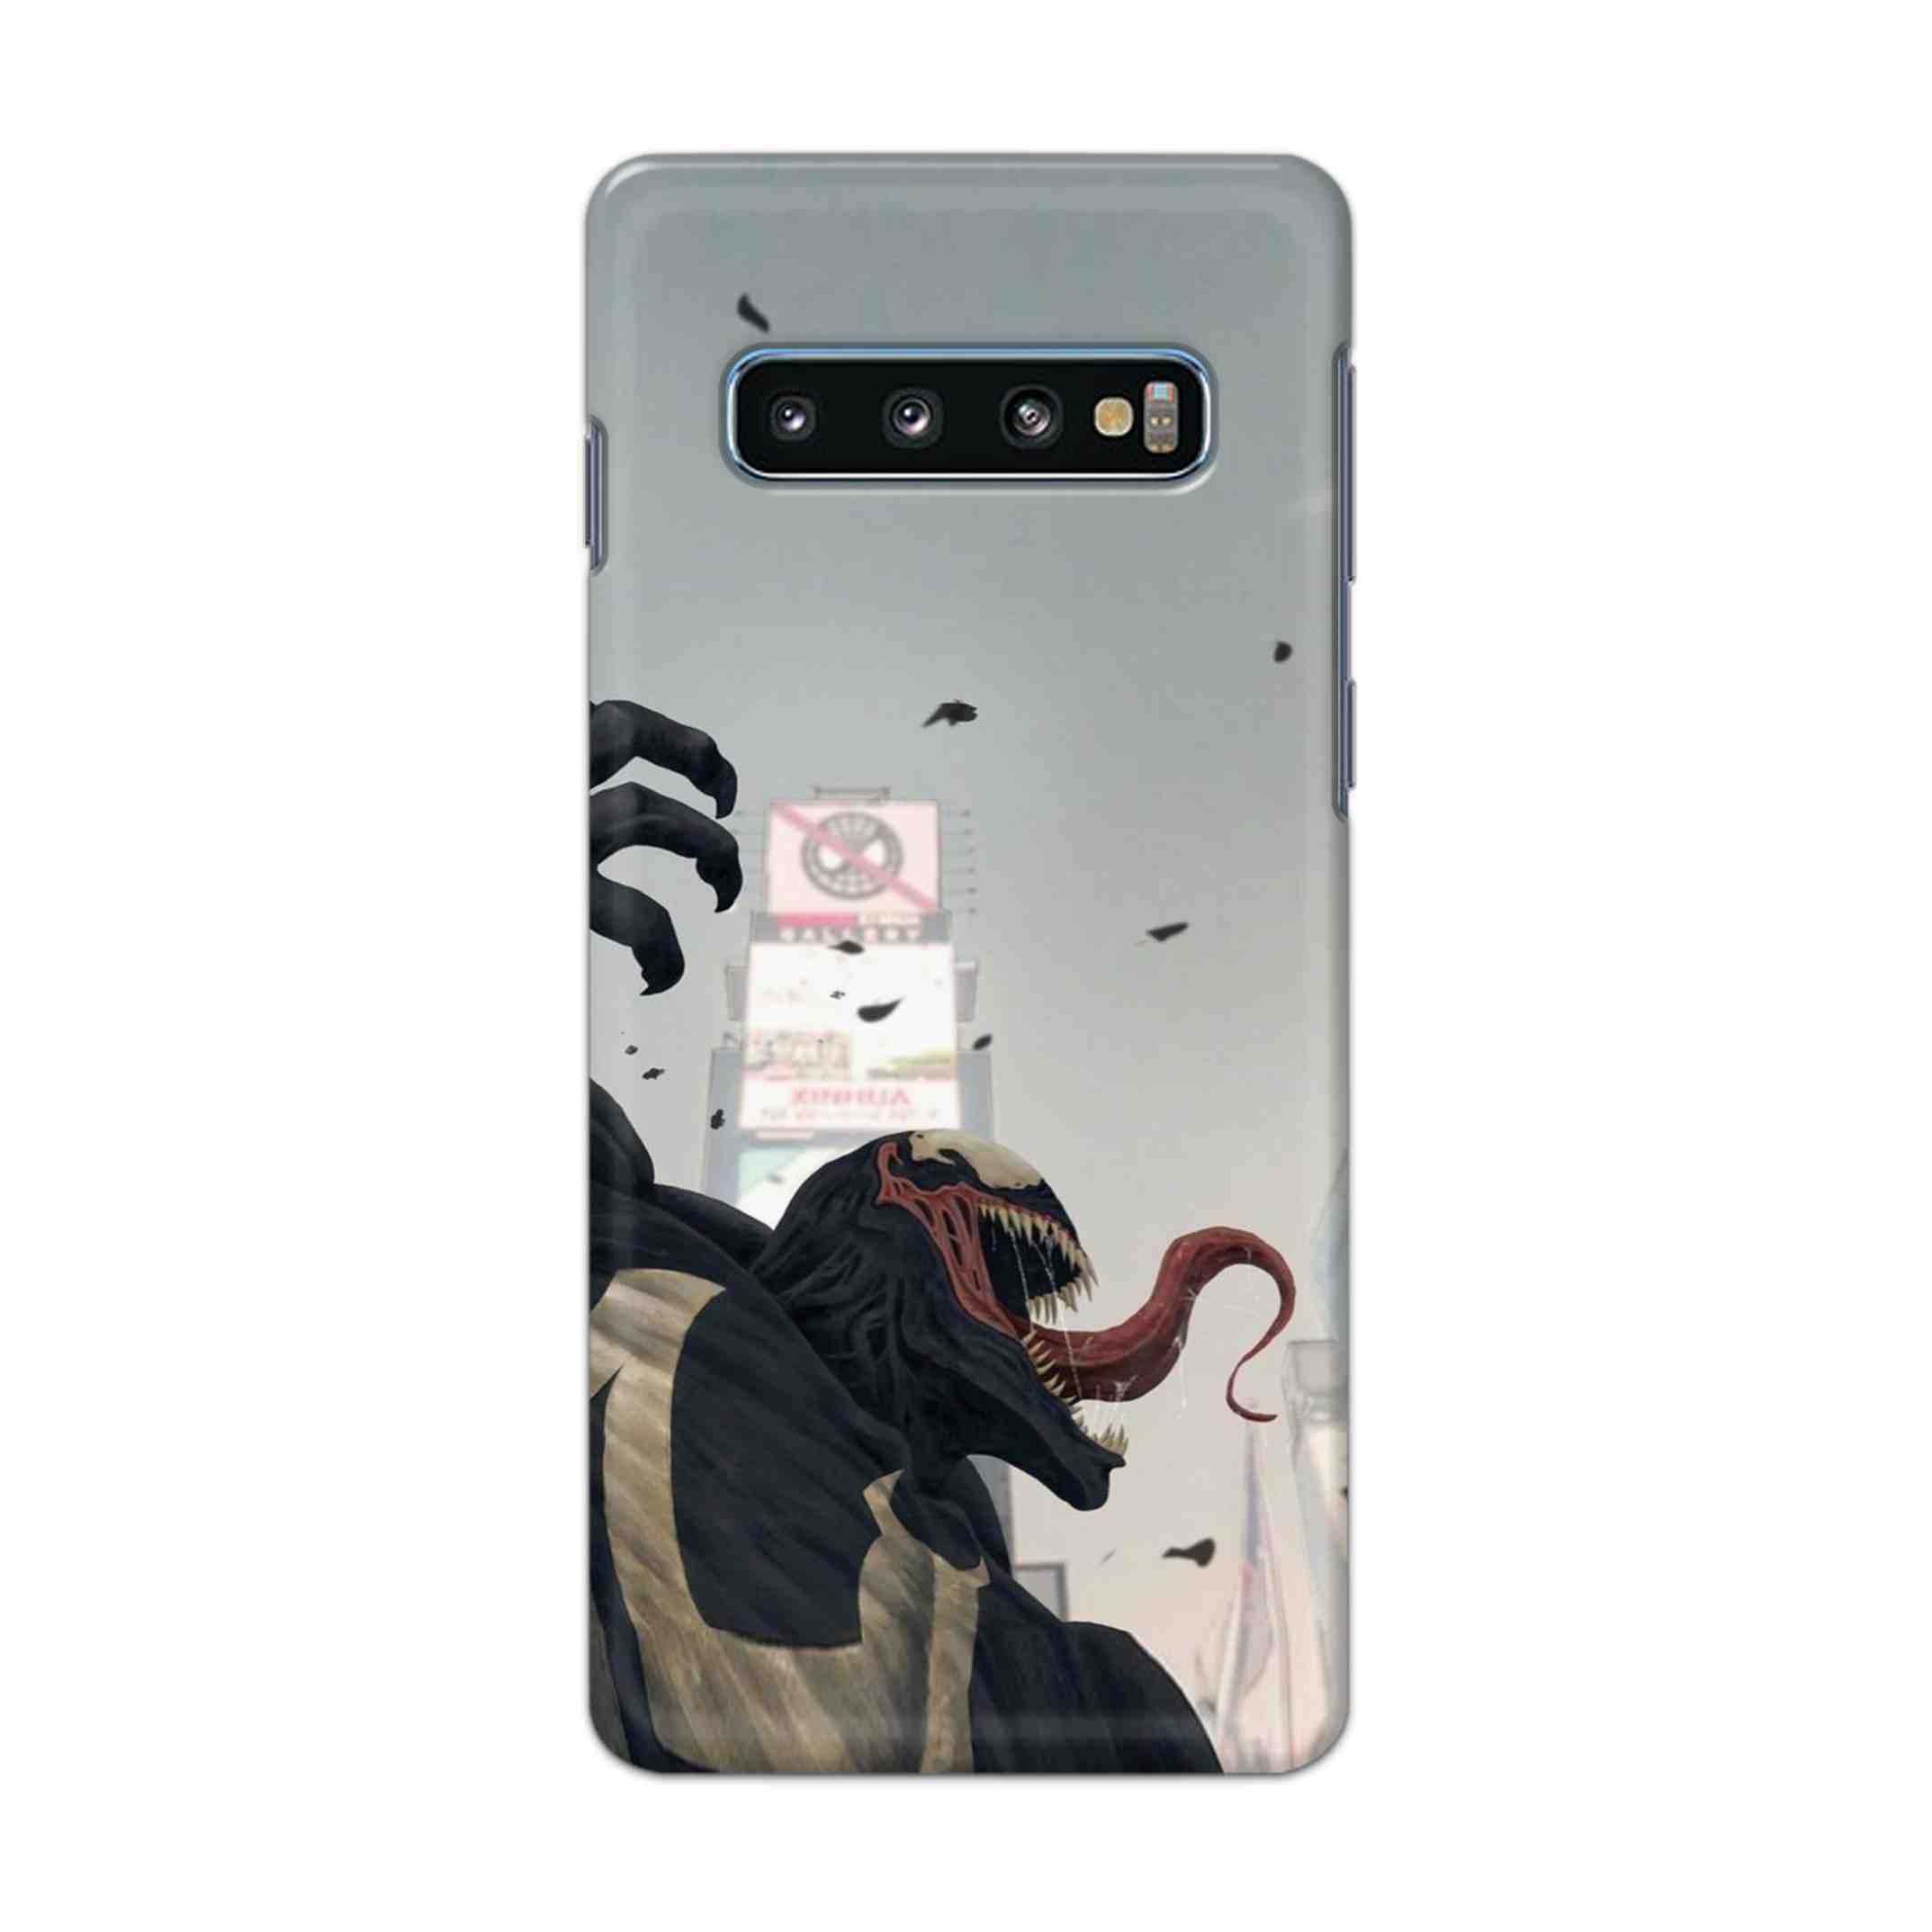 Buy Venom Crunch Hard Back Mobile Phone Case Cover For Samsung Galaxy S10 Plus Online